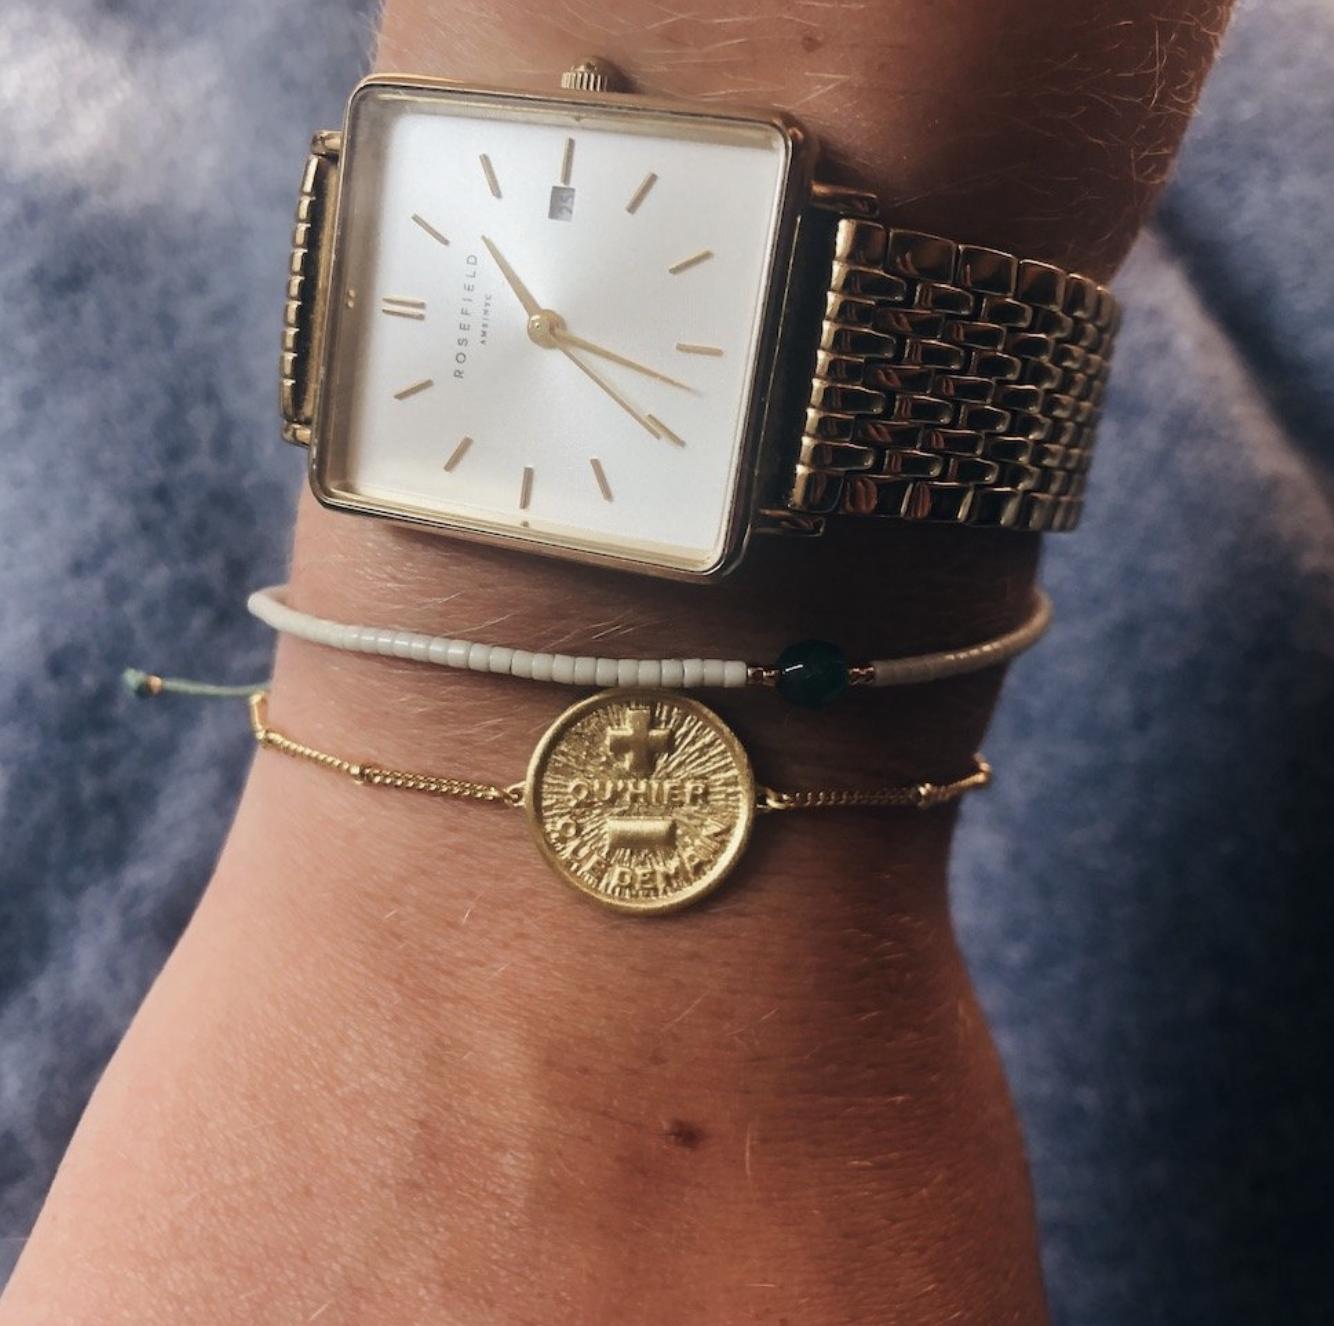 "LOVE ME MORE" ARMBAND (gold) - Oh Happy Life